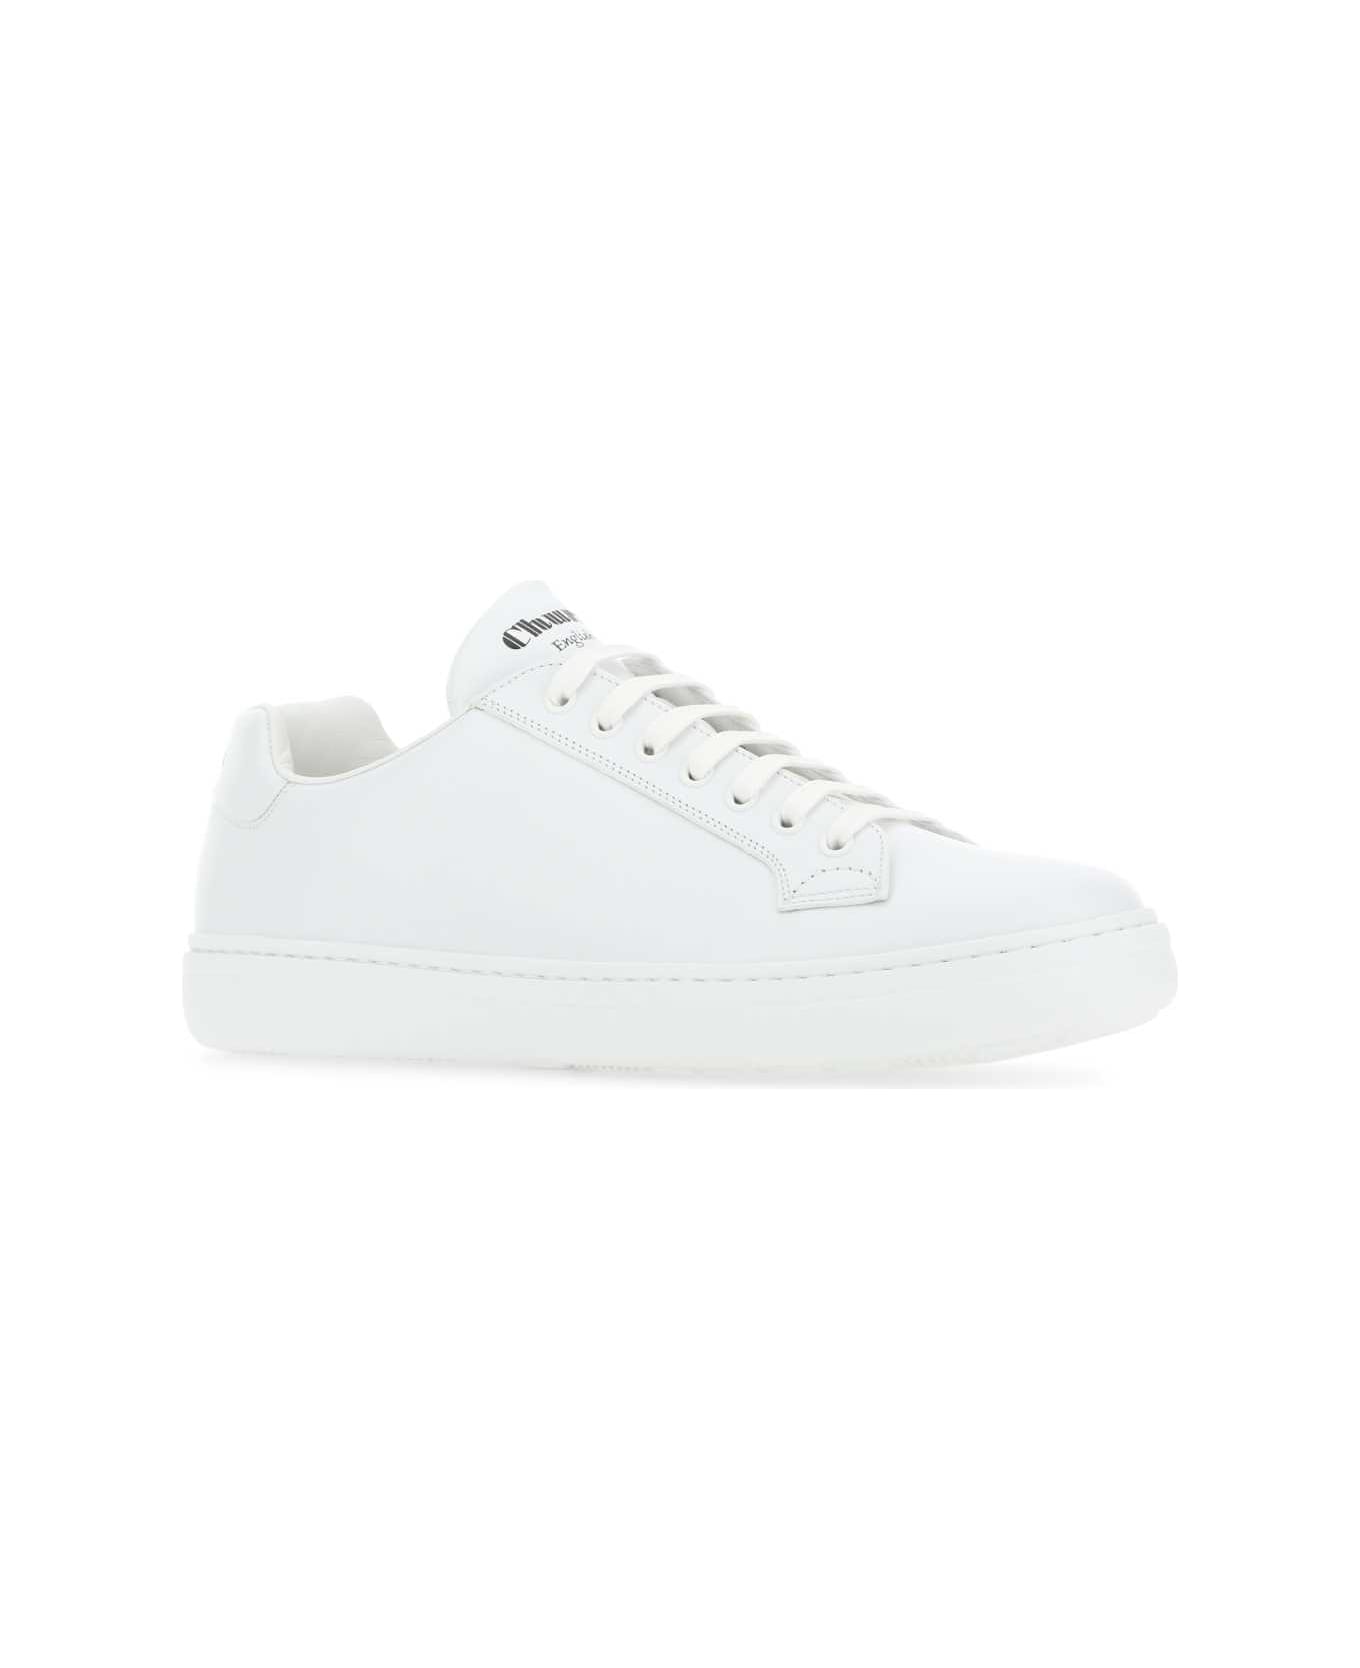 Church's White Leather Boland S Sneakers - F0ABK スニーカー